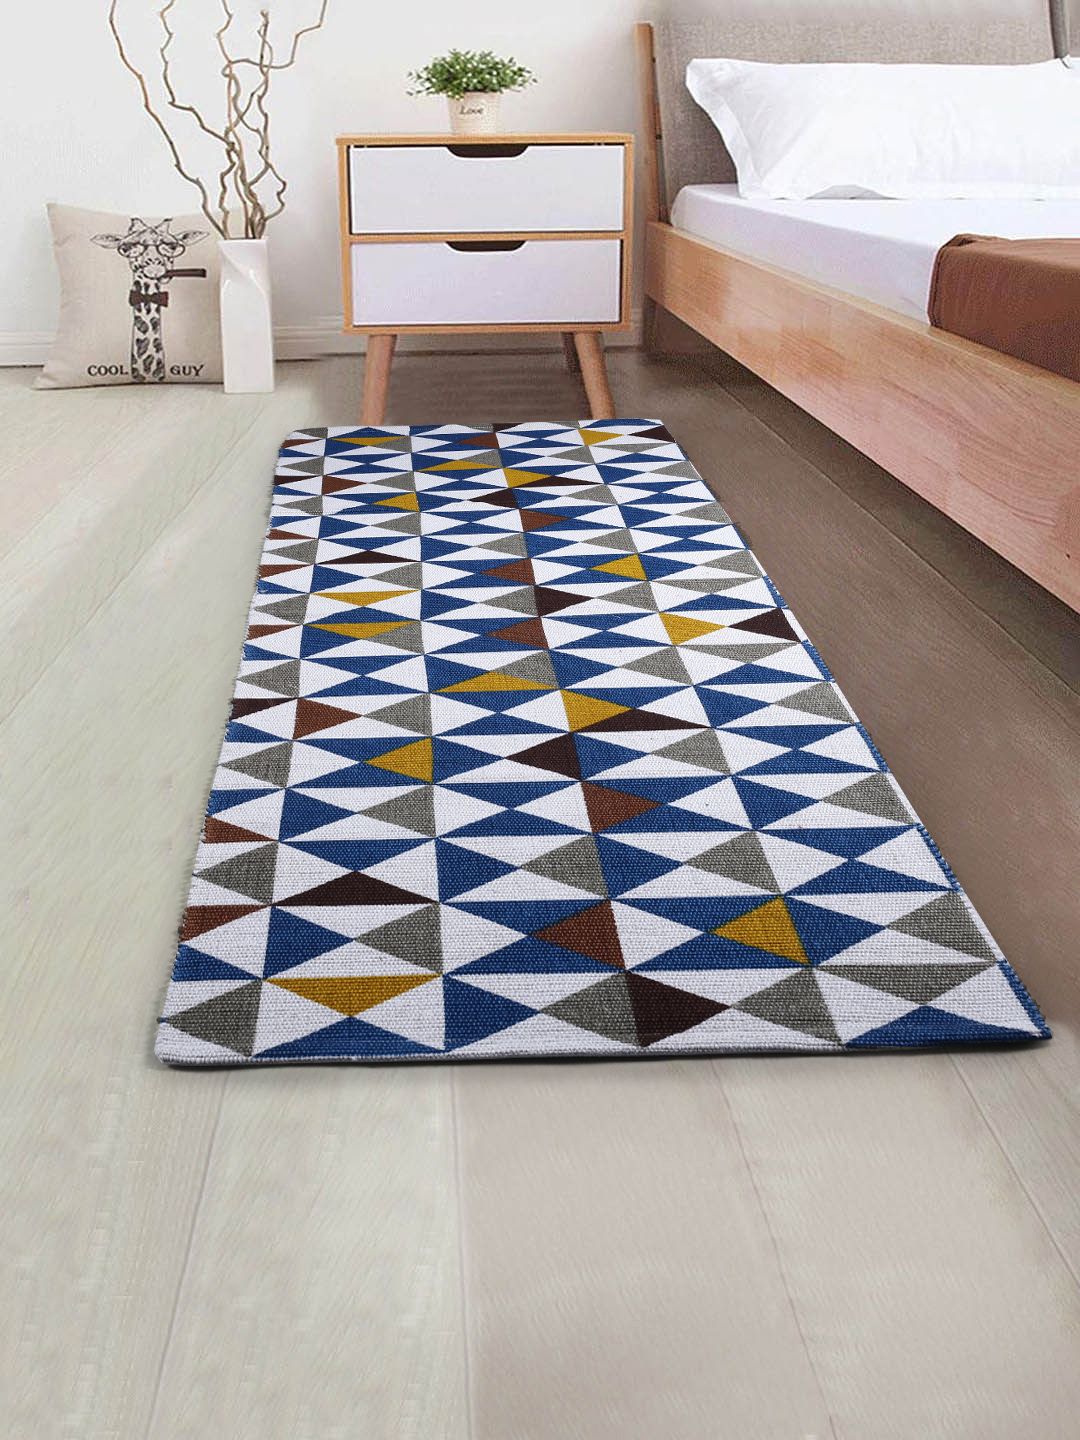 Saral Home Unisex Turquoise Blue & White Geometric Floor Runner Price in India